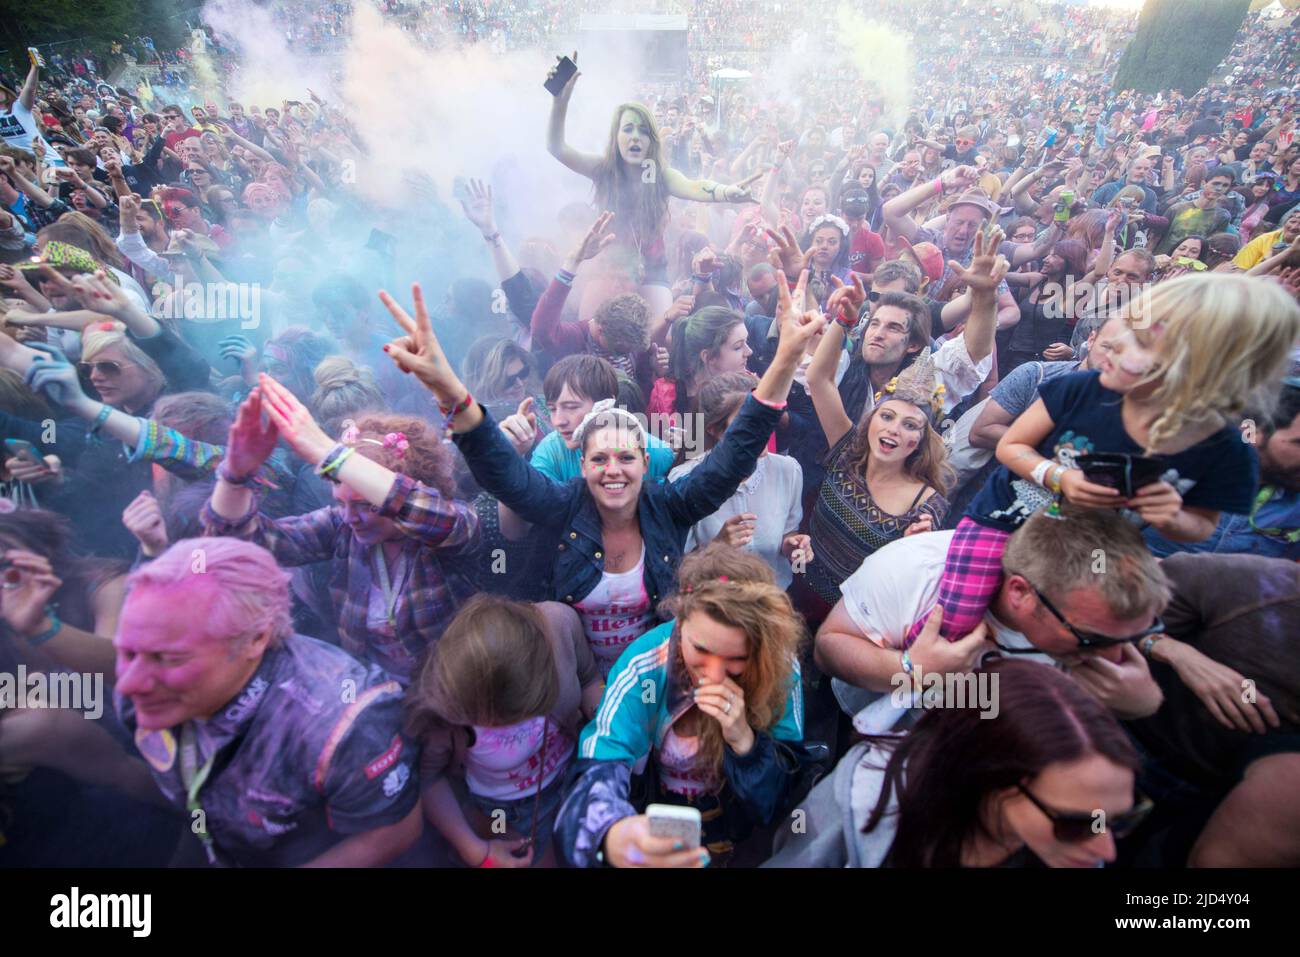 Festival goers throw colored powder at the main stage at Belladrum Tartan Hearts Festival at Inverness, United Kingdom Stock Photo